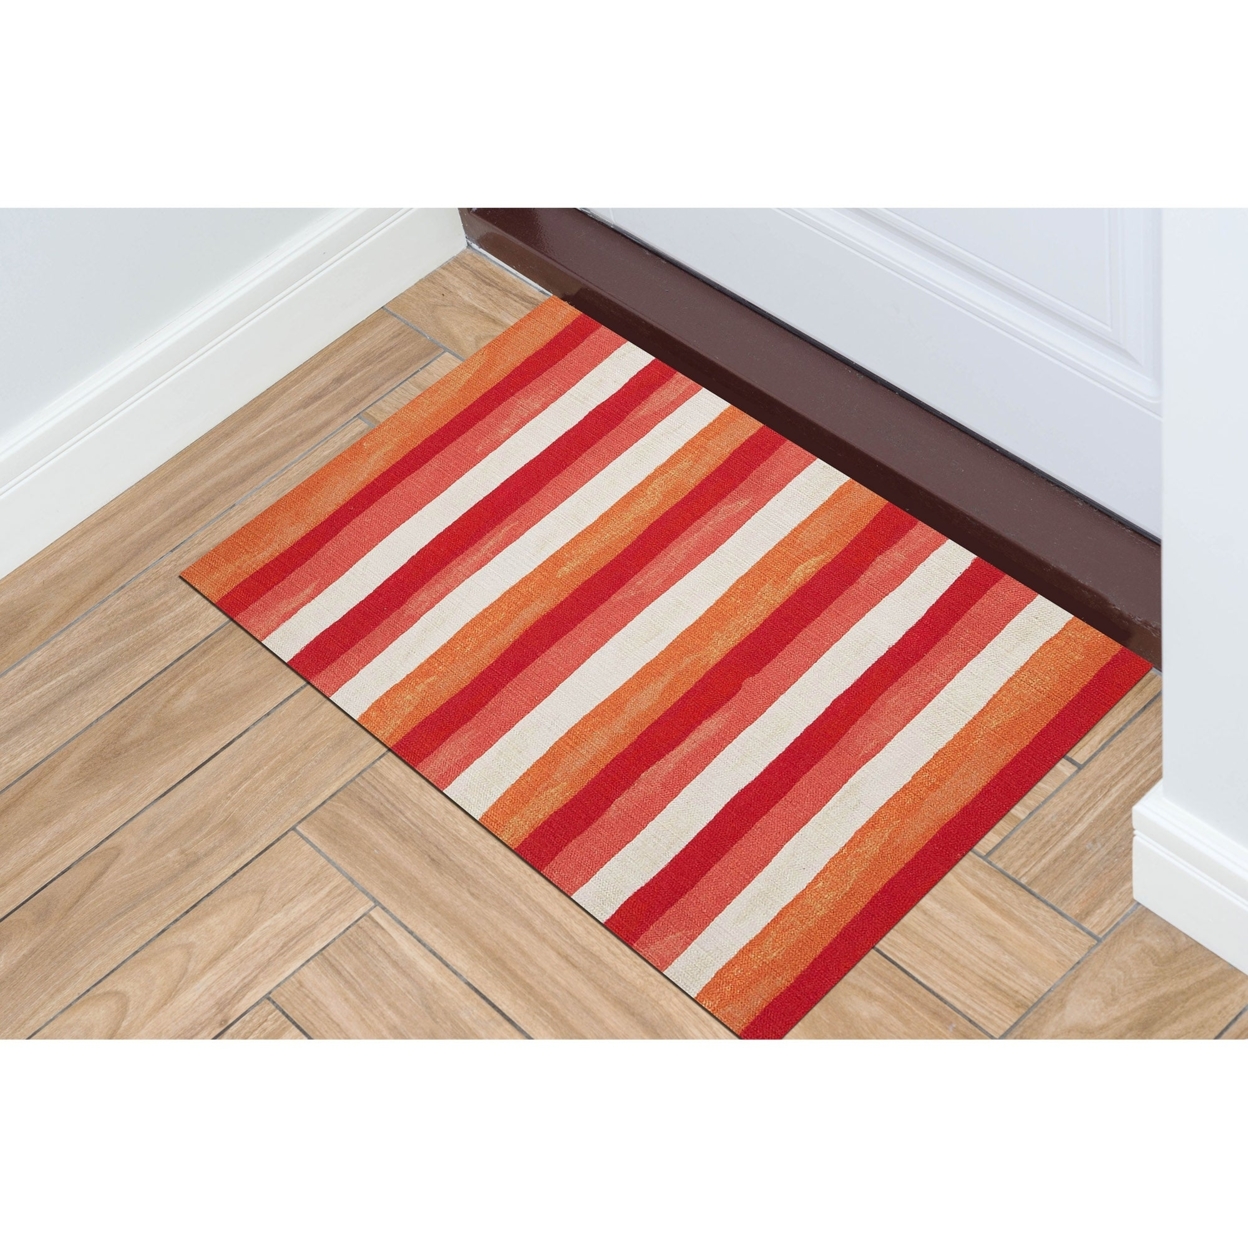 Liora Manne Visions II Painted Stripes Indoor Outdoor Area Rug Warm - 3'6 X 5'6